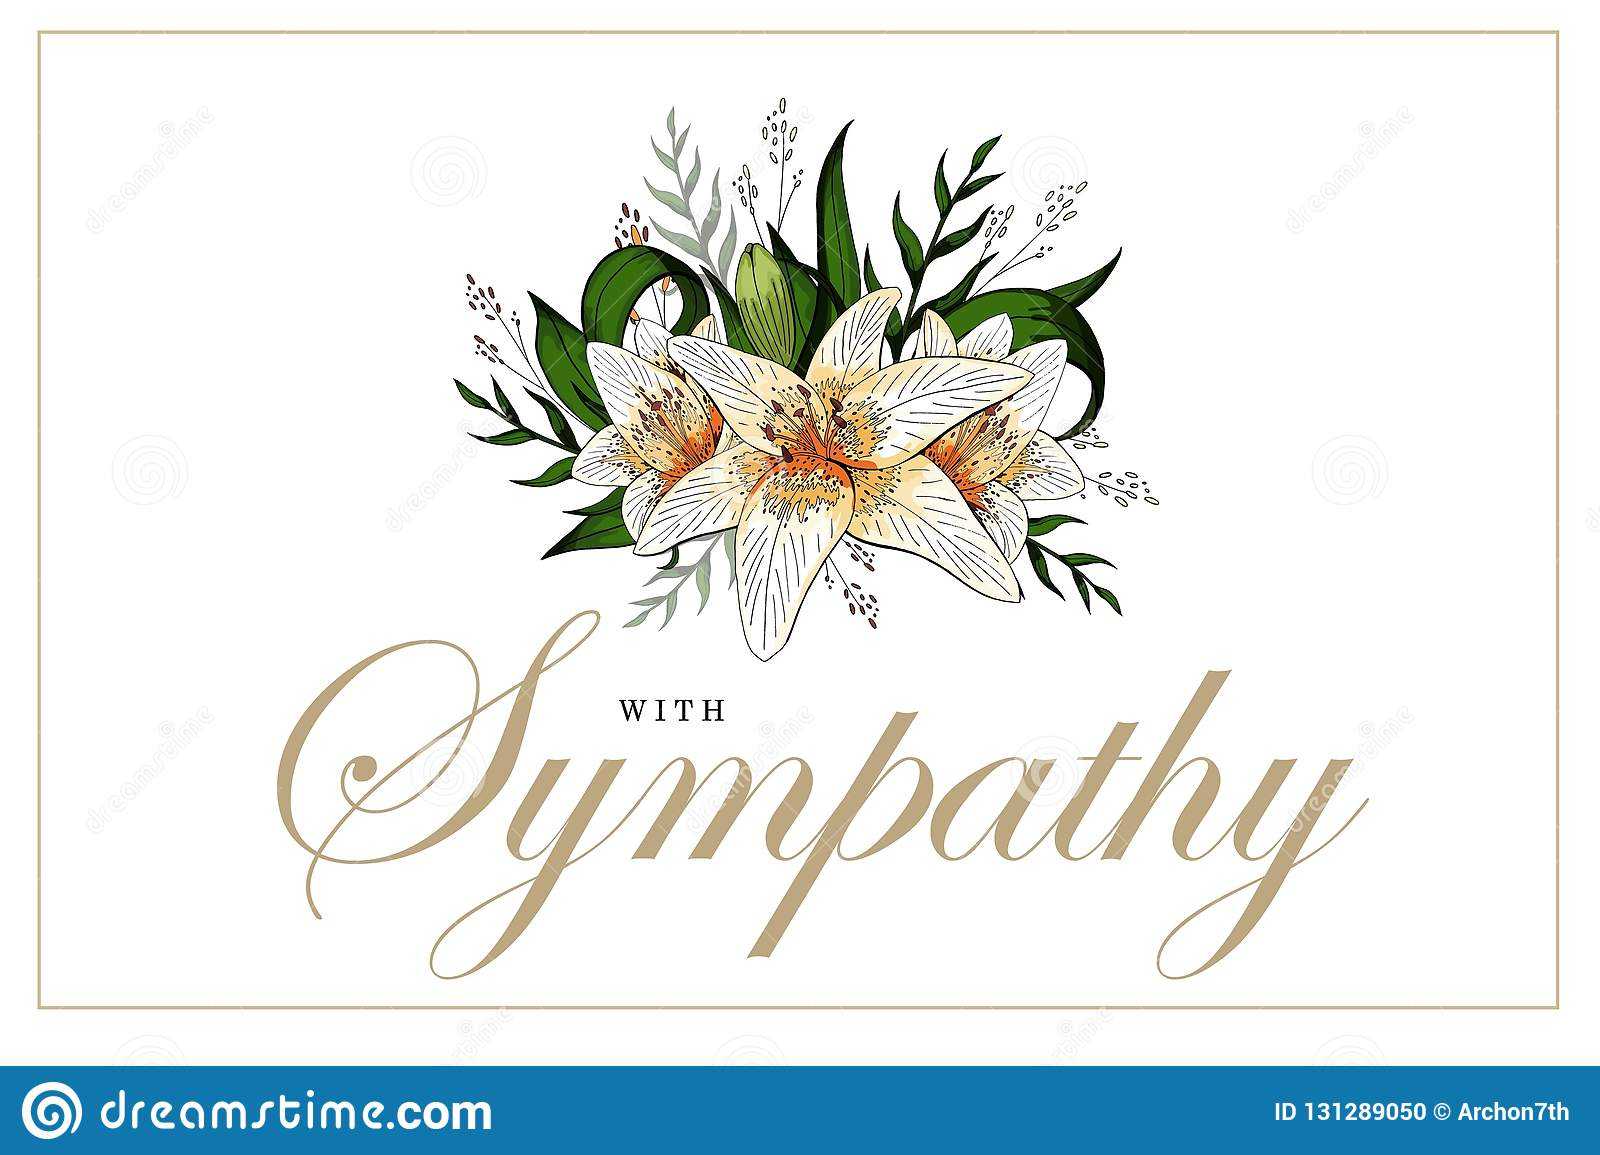 Condolences Sympathy Card Floral Lily Bouquet And Lettering In Sympathy Card Template